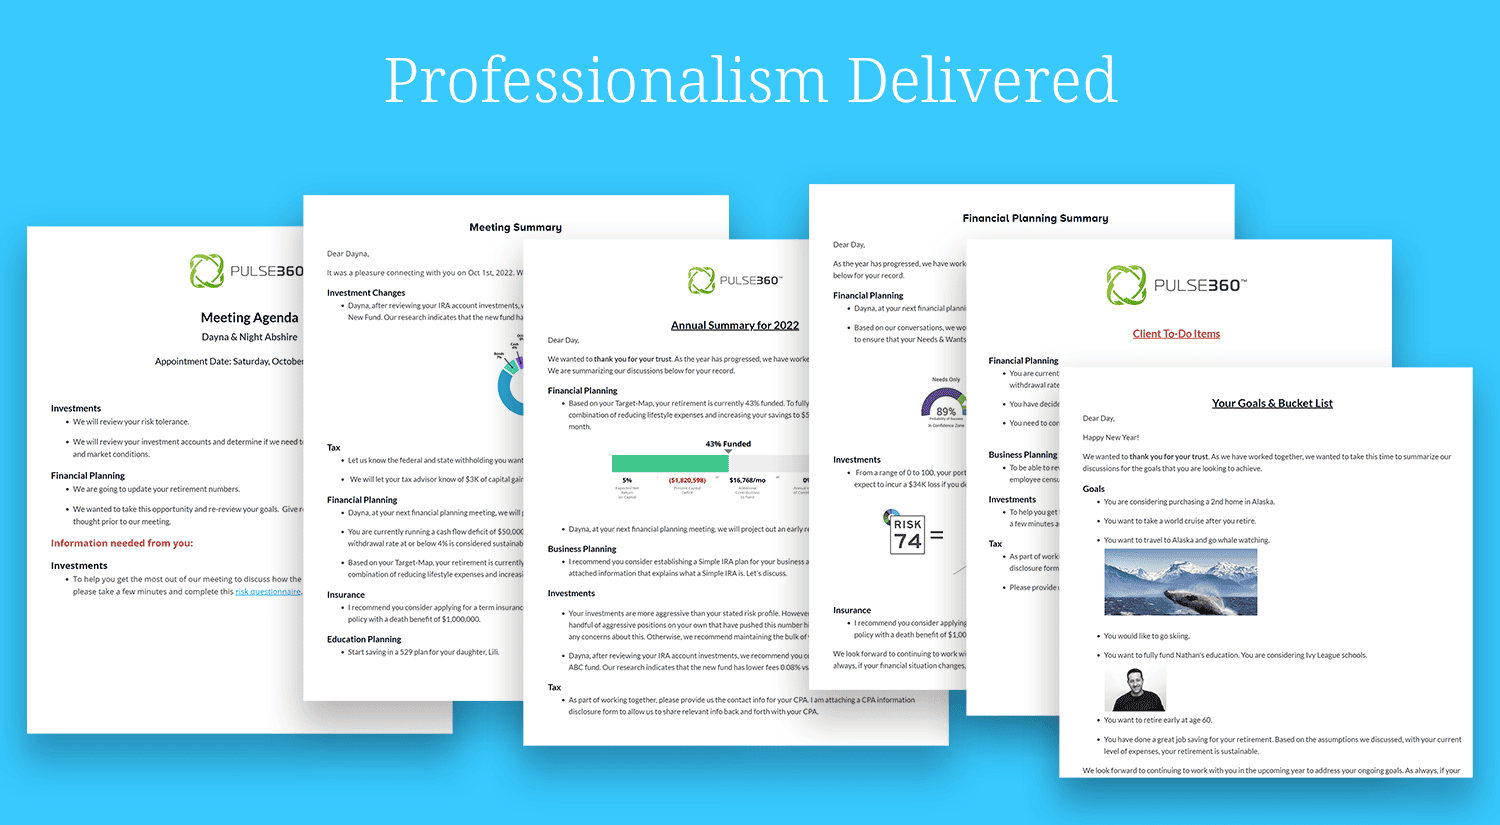 Financial Advisors, use Pulse360 to prepare professional documentation/deliverables to your clients